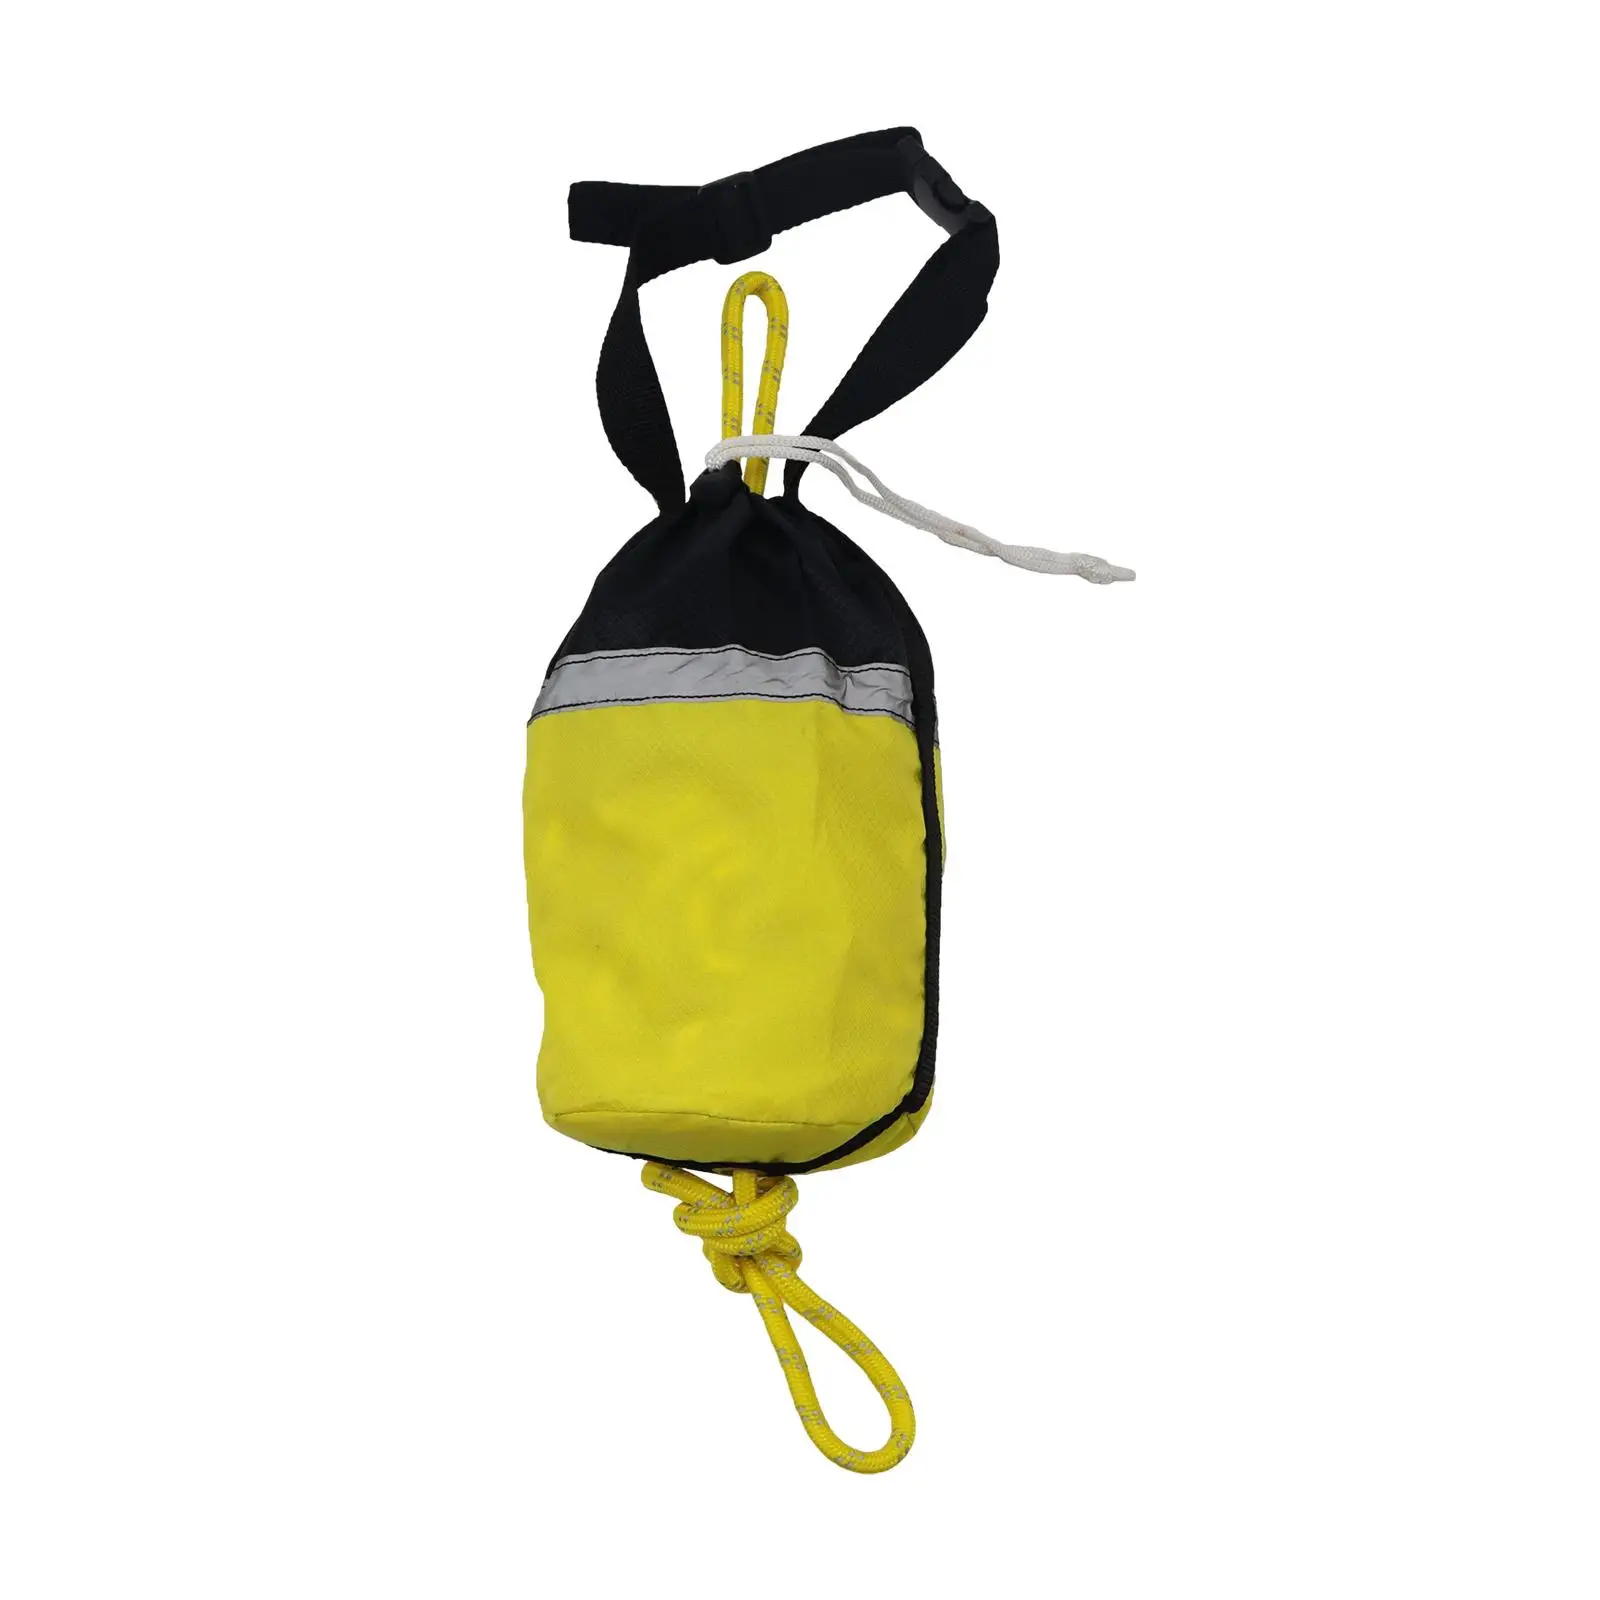 Portable Throw Rope Throw Bag Floating Ropes for Swimming Fishing